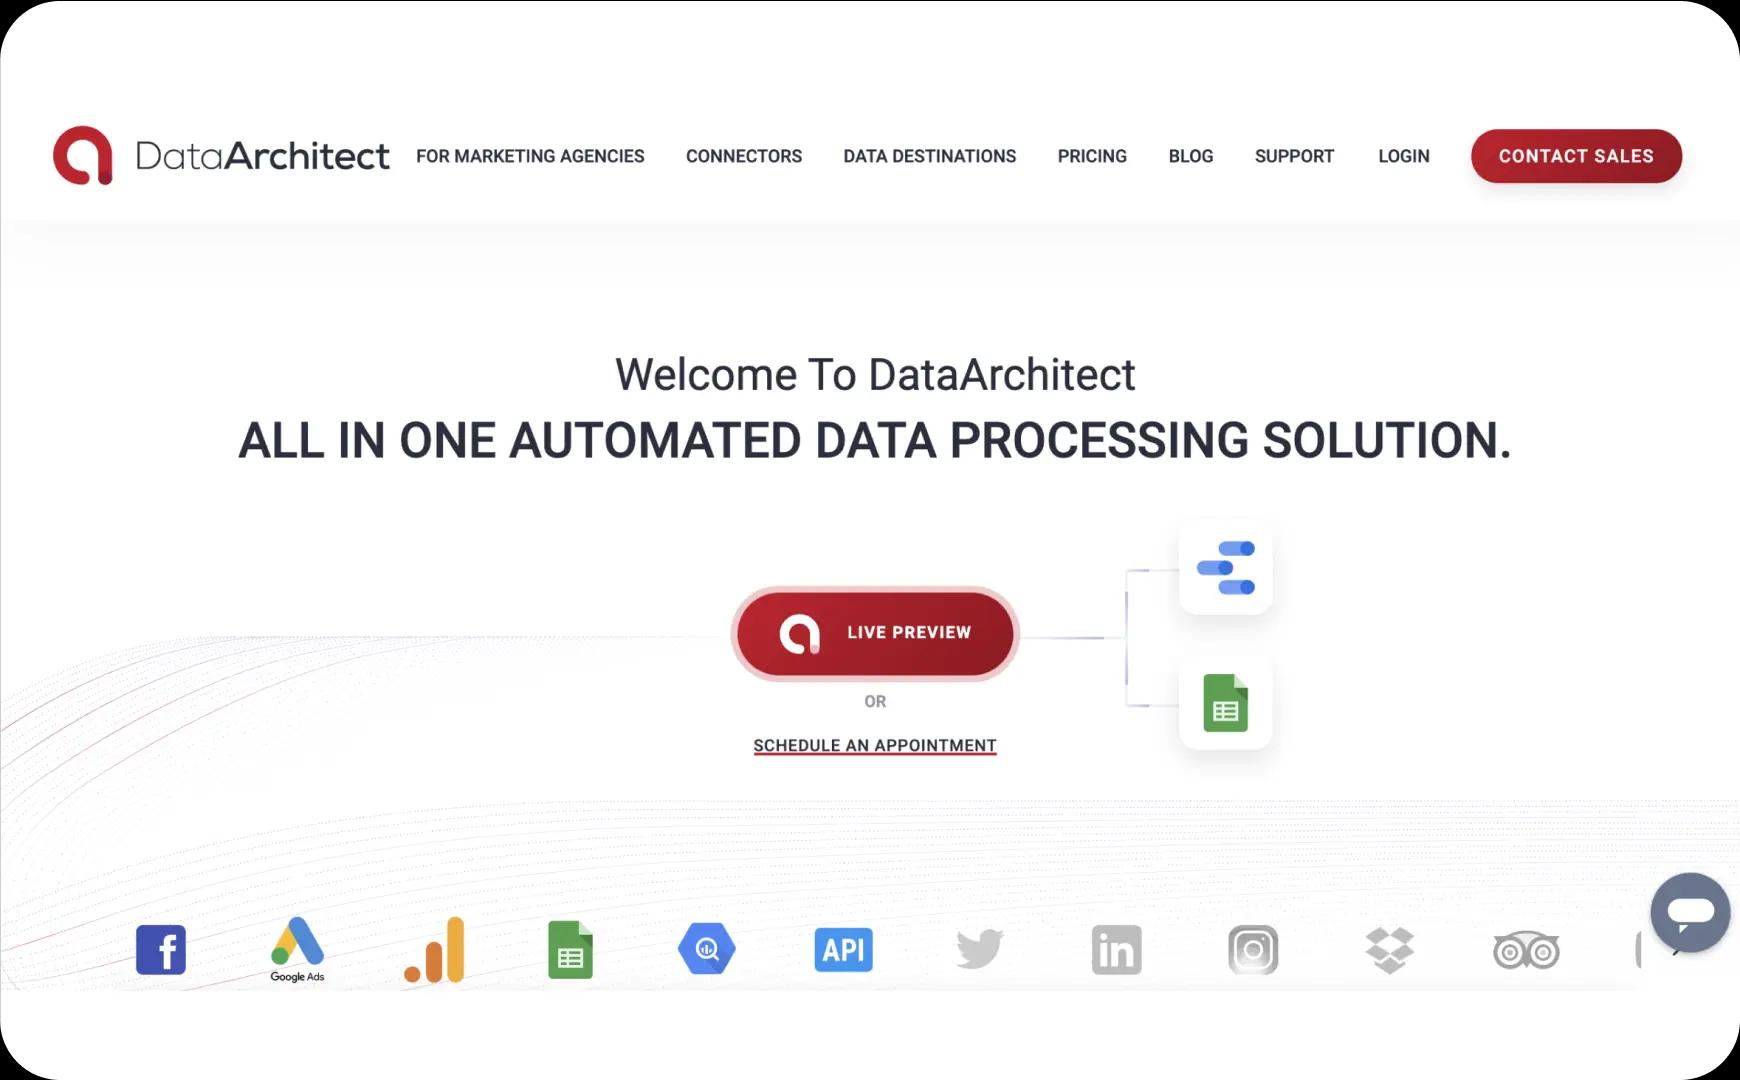 All-in-one automated data processing solution